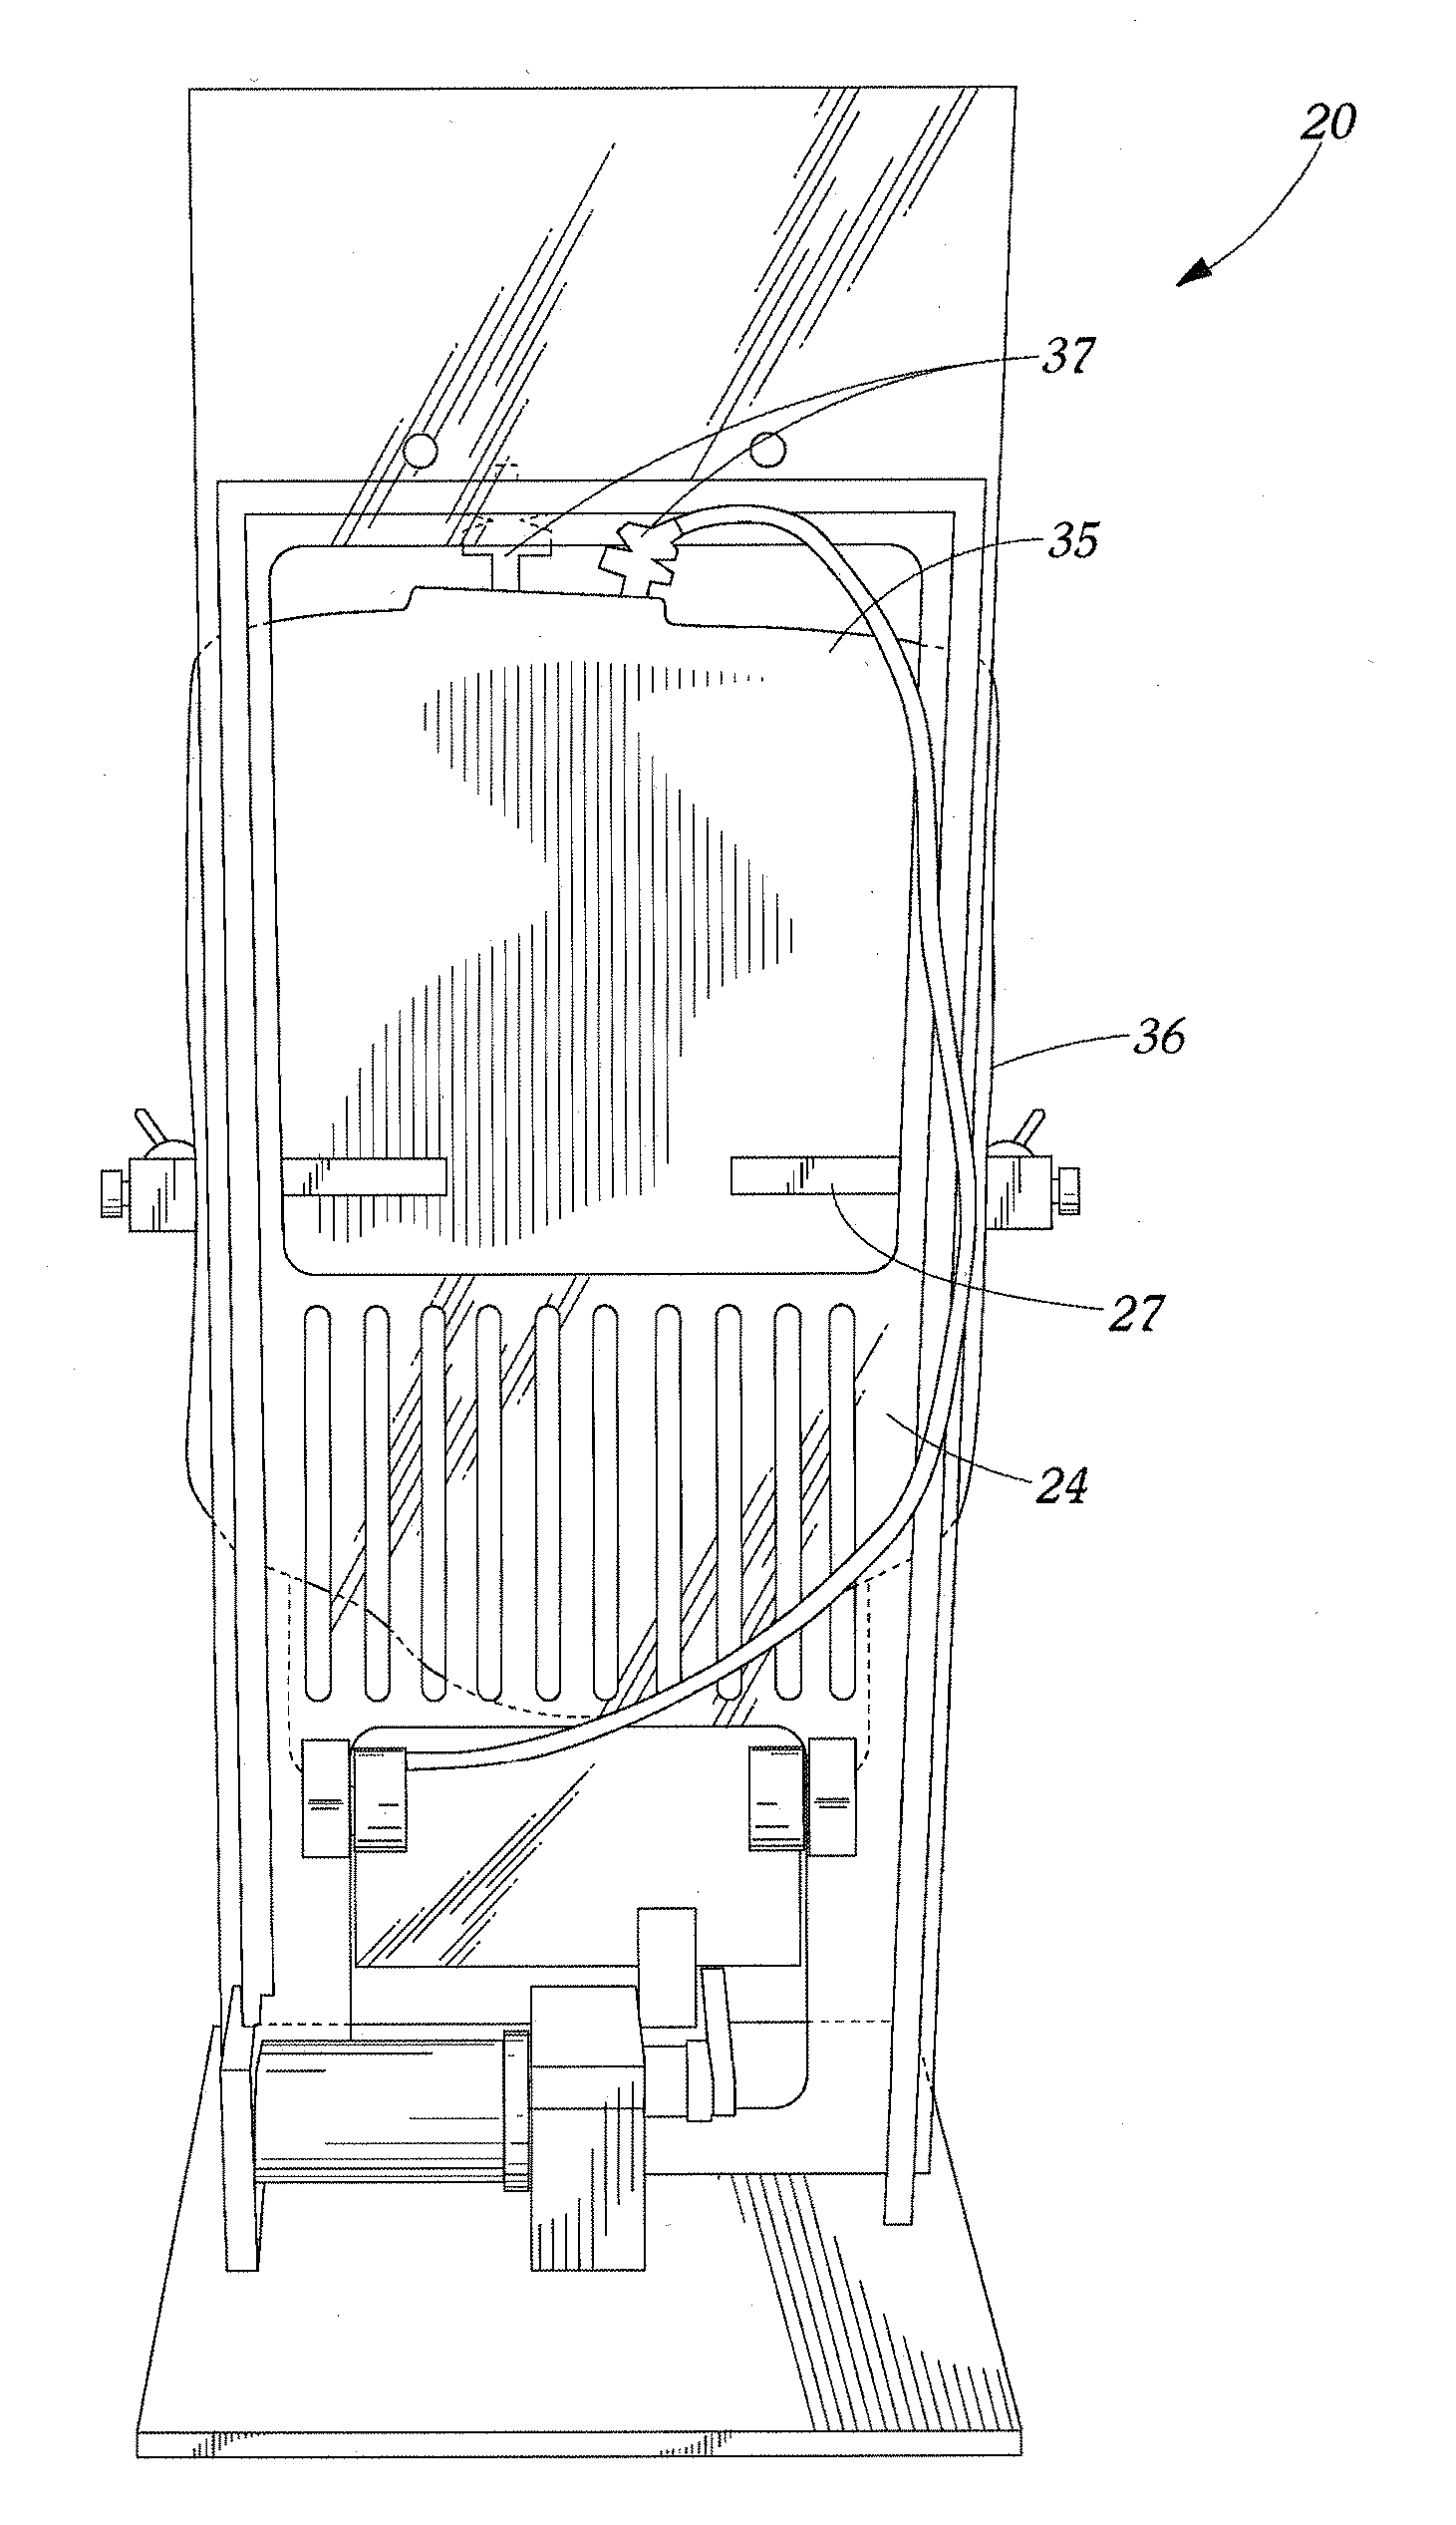 Container or bag mixing apparatuses and/or methods